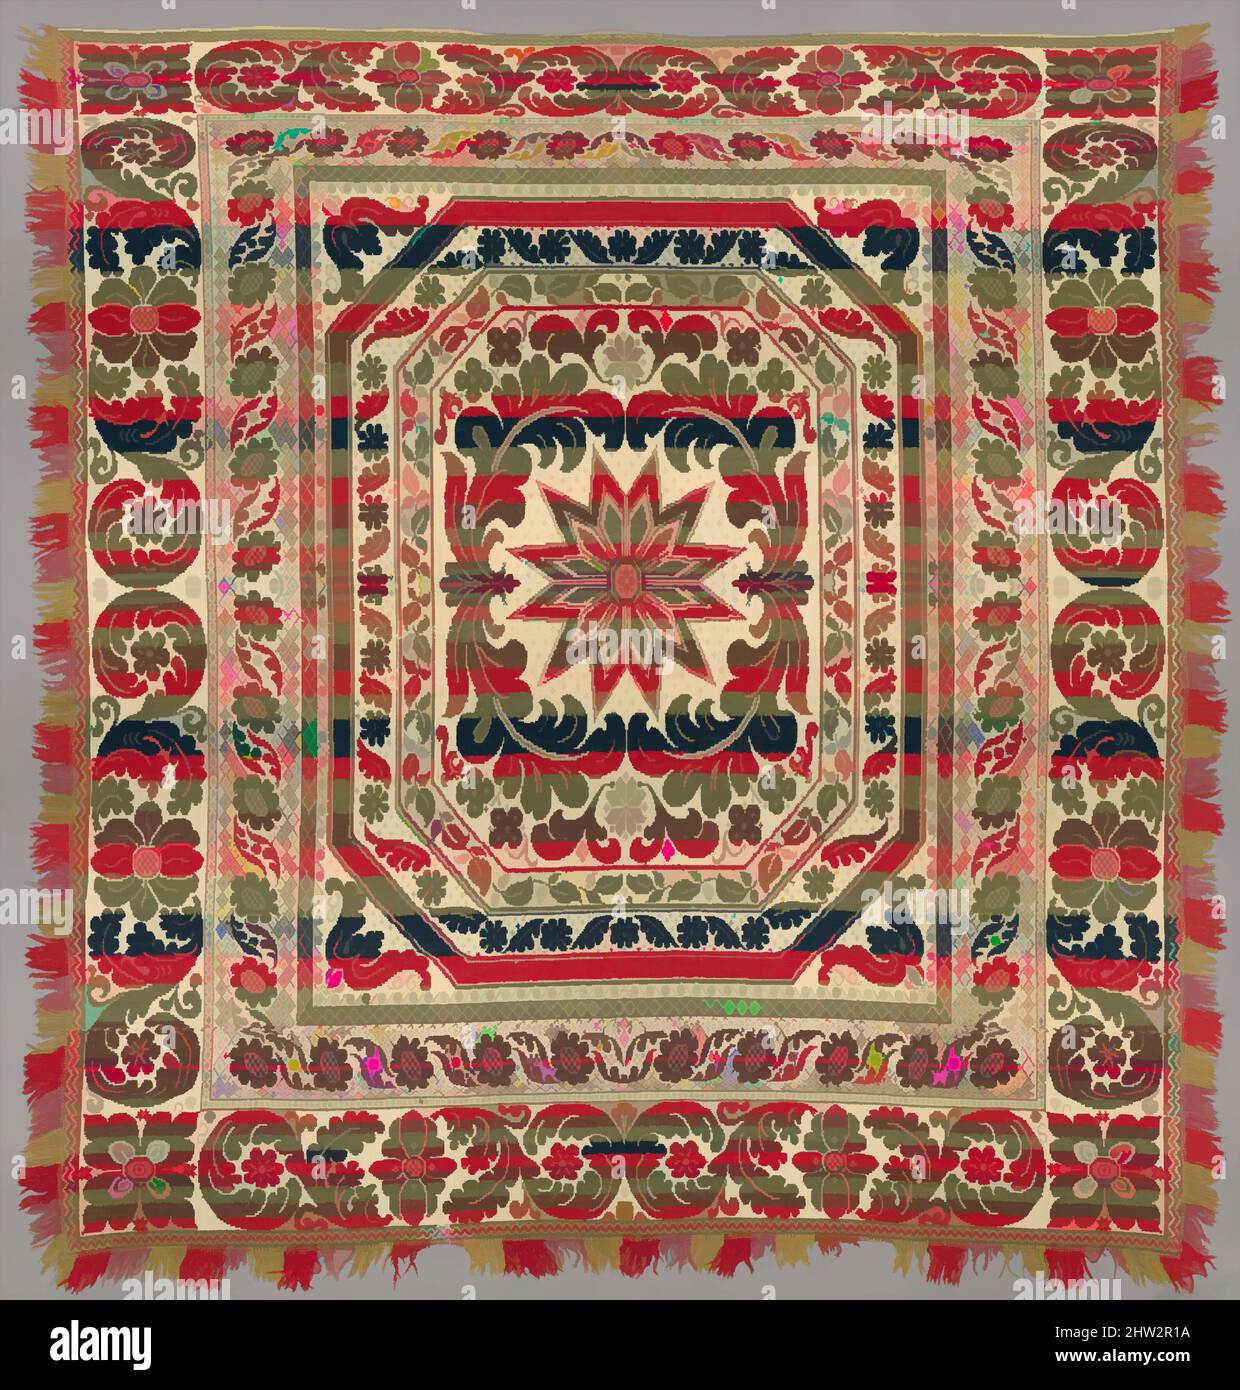 Art inspired by Coverlet, ca. 1850–70, Wool and cotton, Jacquard-loom-woven, 85 1/2 x 79 in. (217.2 x 200.7 cm), Textiles, Classic works modernized by Artotop with a splash of modernity. Shapes, color and value, eye-catching visual impact on art. Emotions through freedom of artworks in a contemporary way. A timeless message pursuing a wildly creative new direction. Artists turning to the digital medium and creating the Artotop NFT Stock Photo